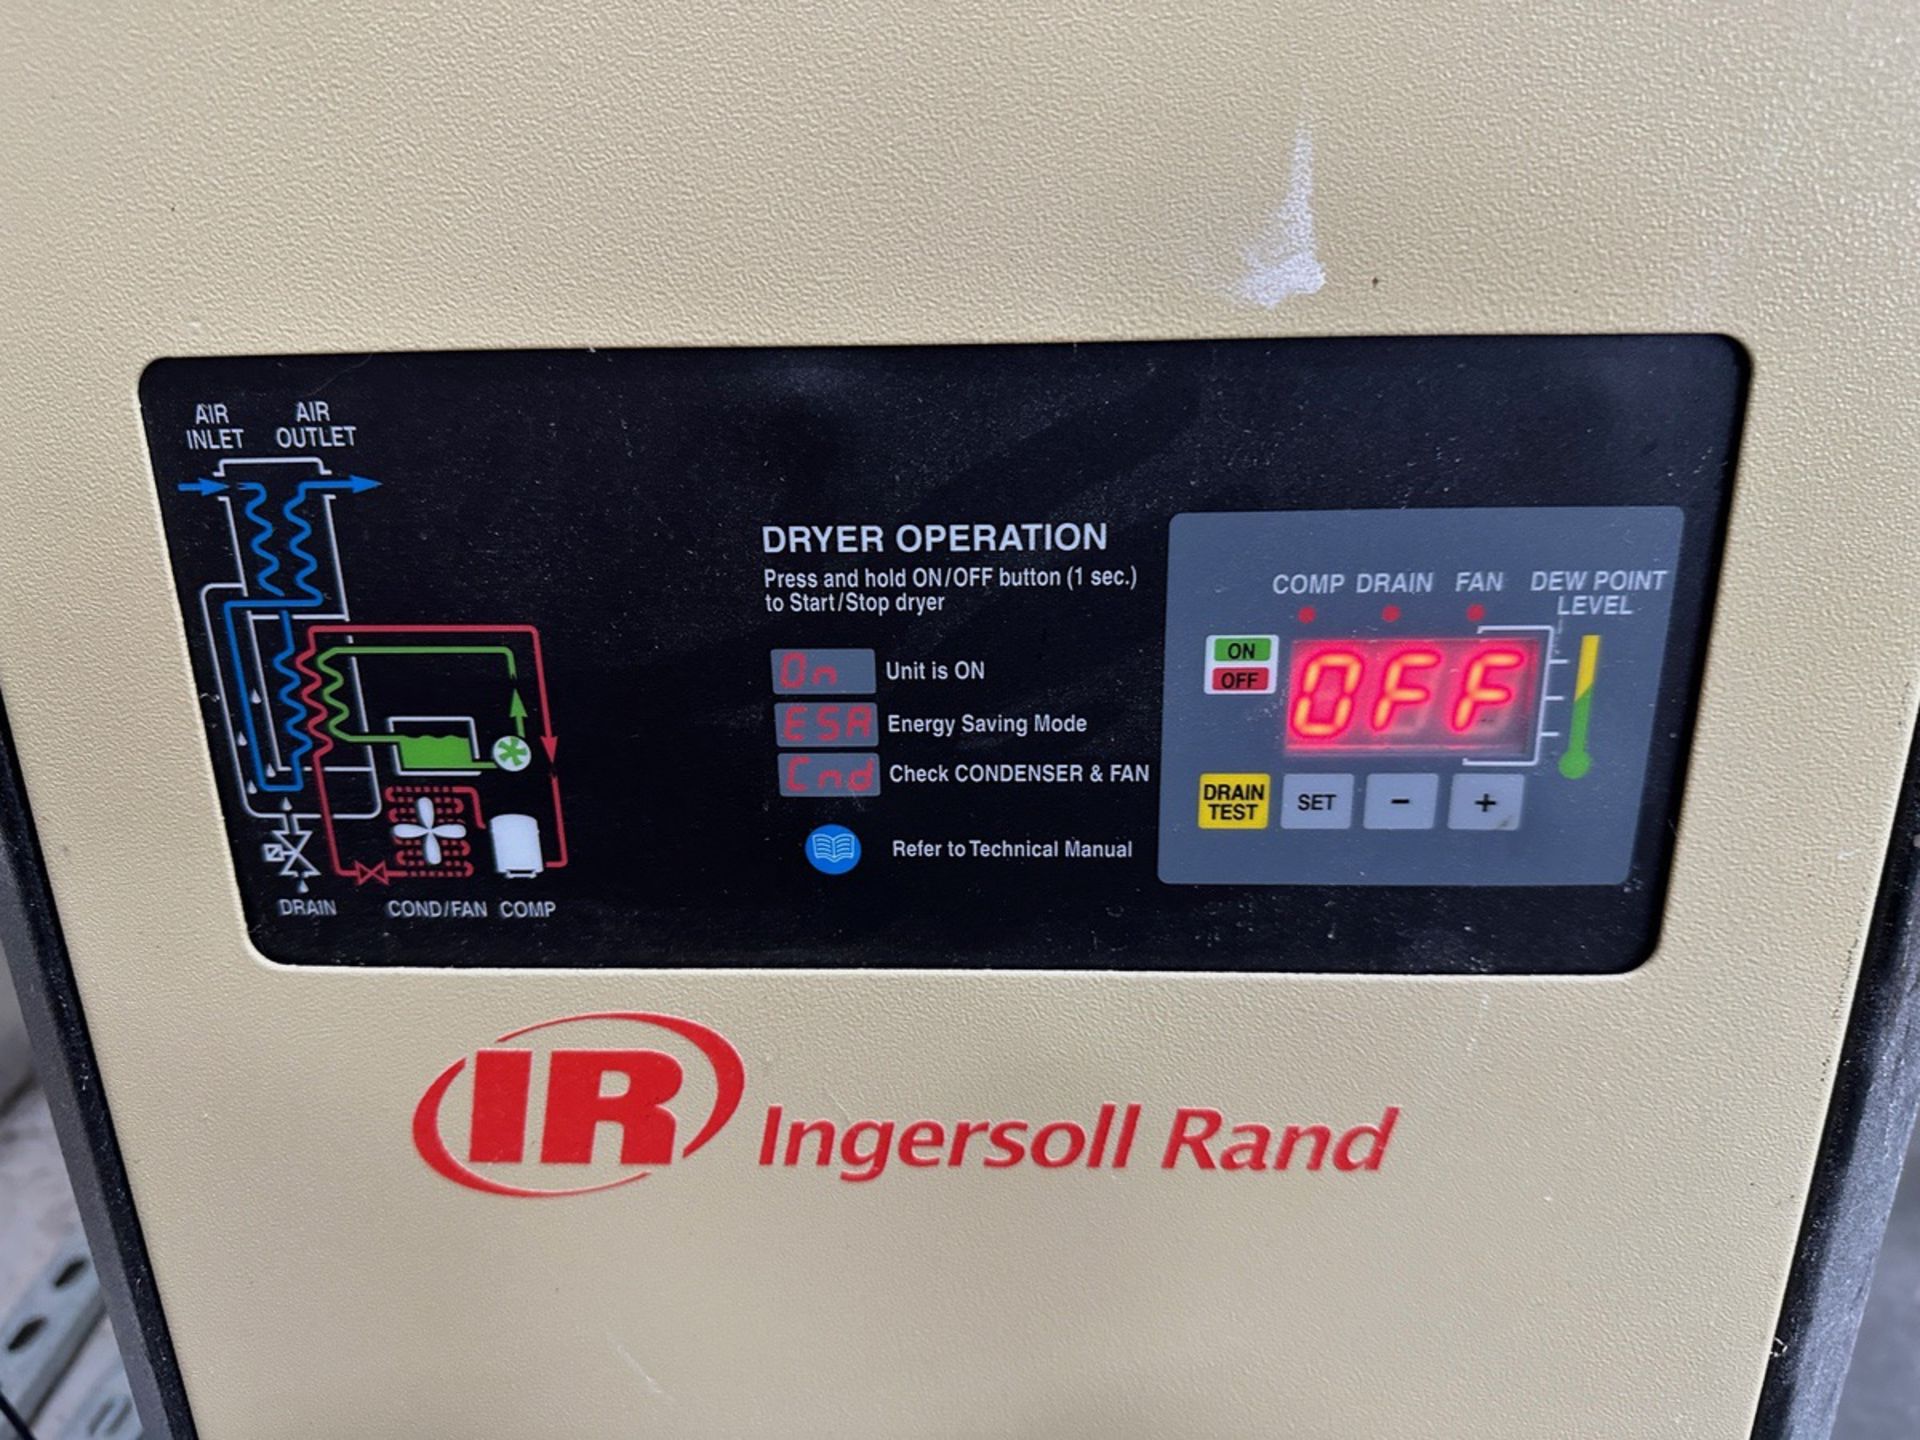 Ingersoll Rand 80 Gallon Air Compressor - Model 2475N7.5-P with Ingersoll | Rig Fee $125 - Image 5 of 7